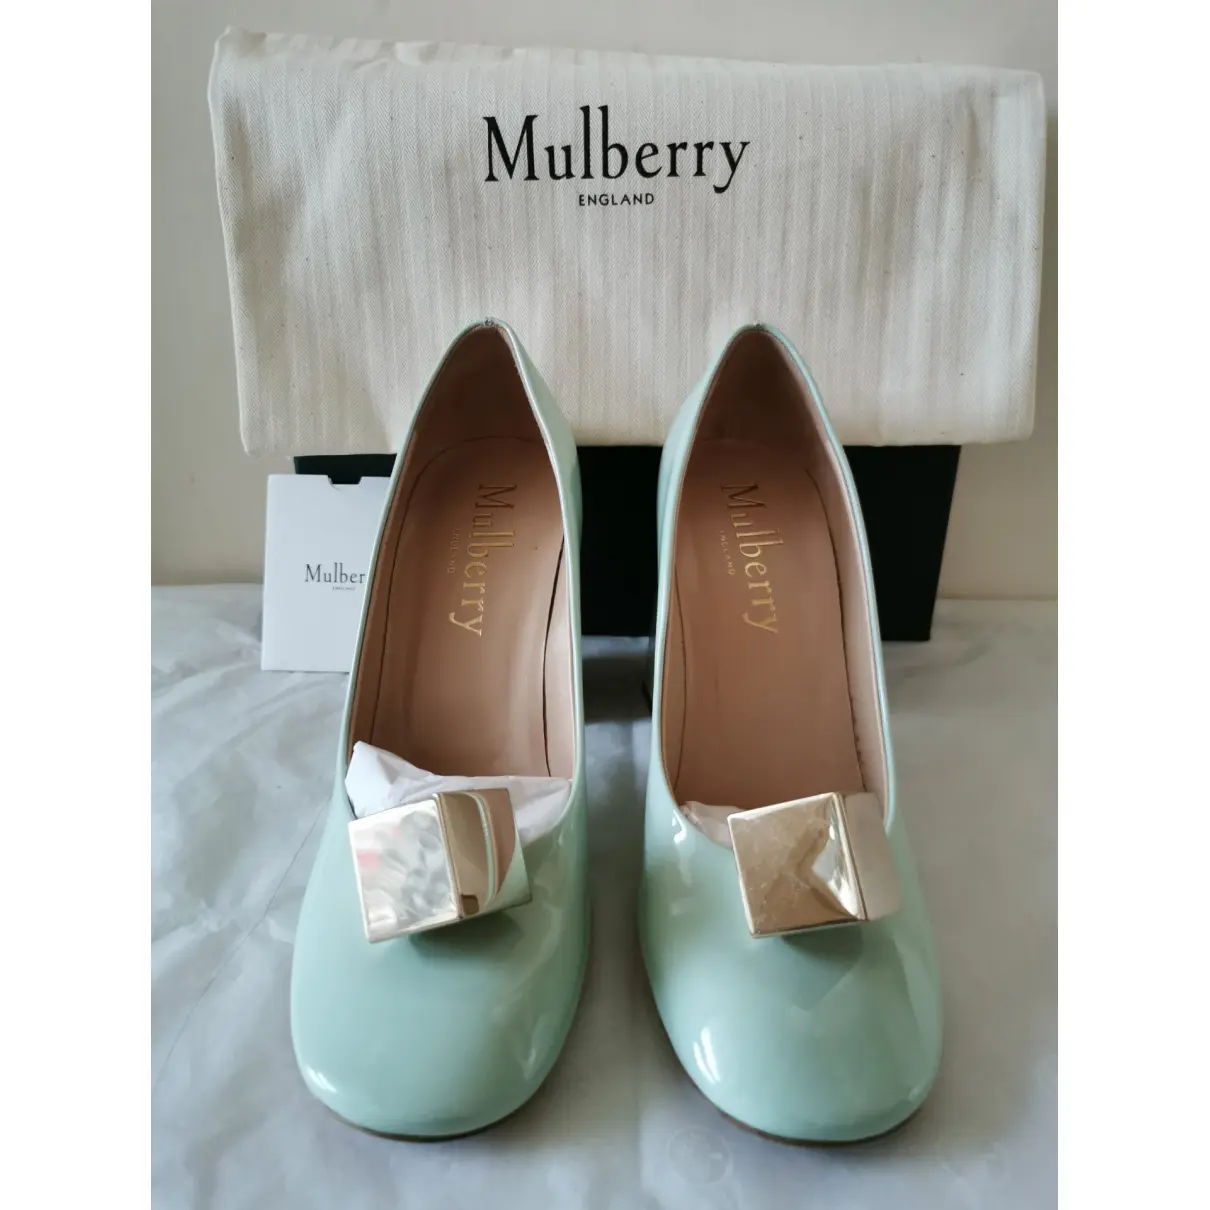 Buy Mulberry Patent leather heels online